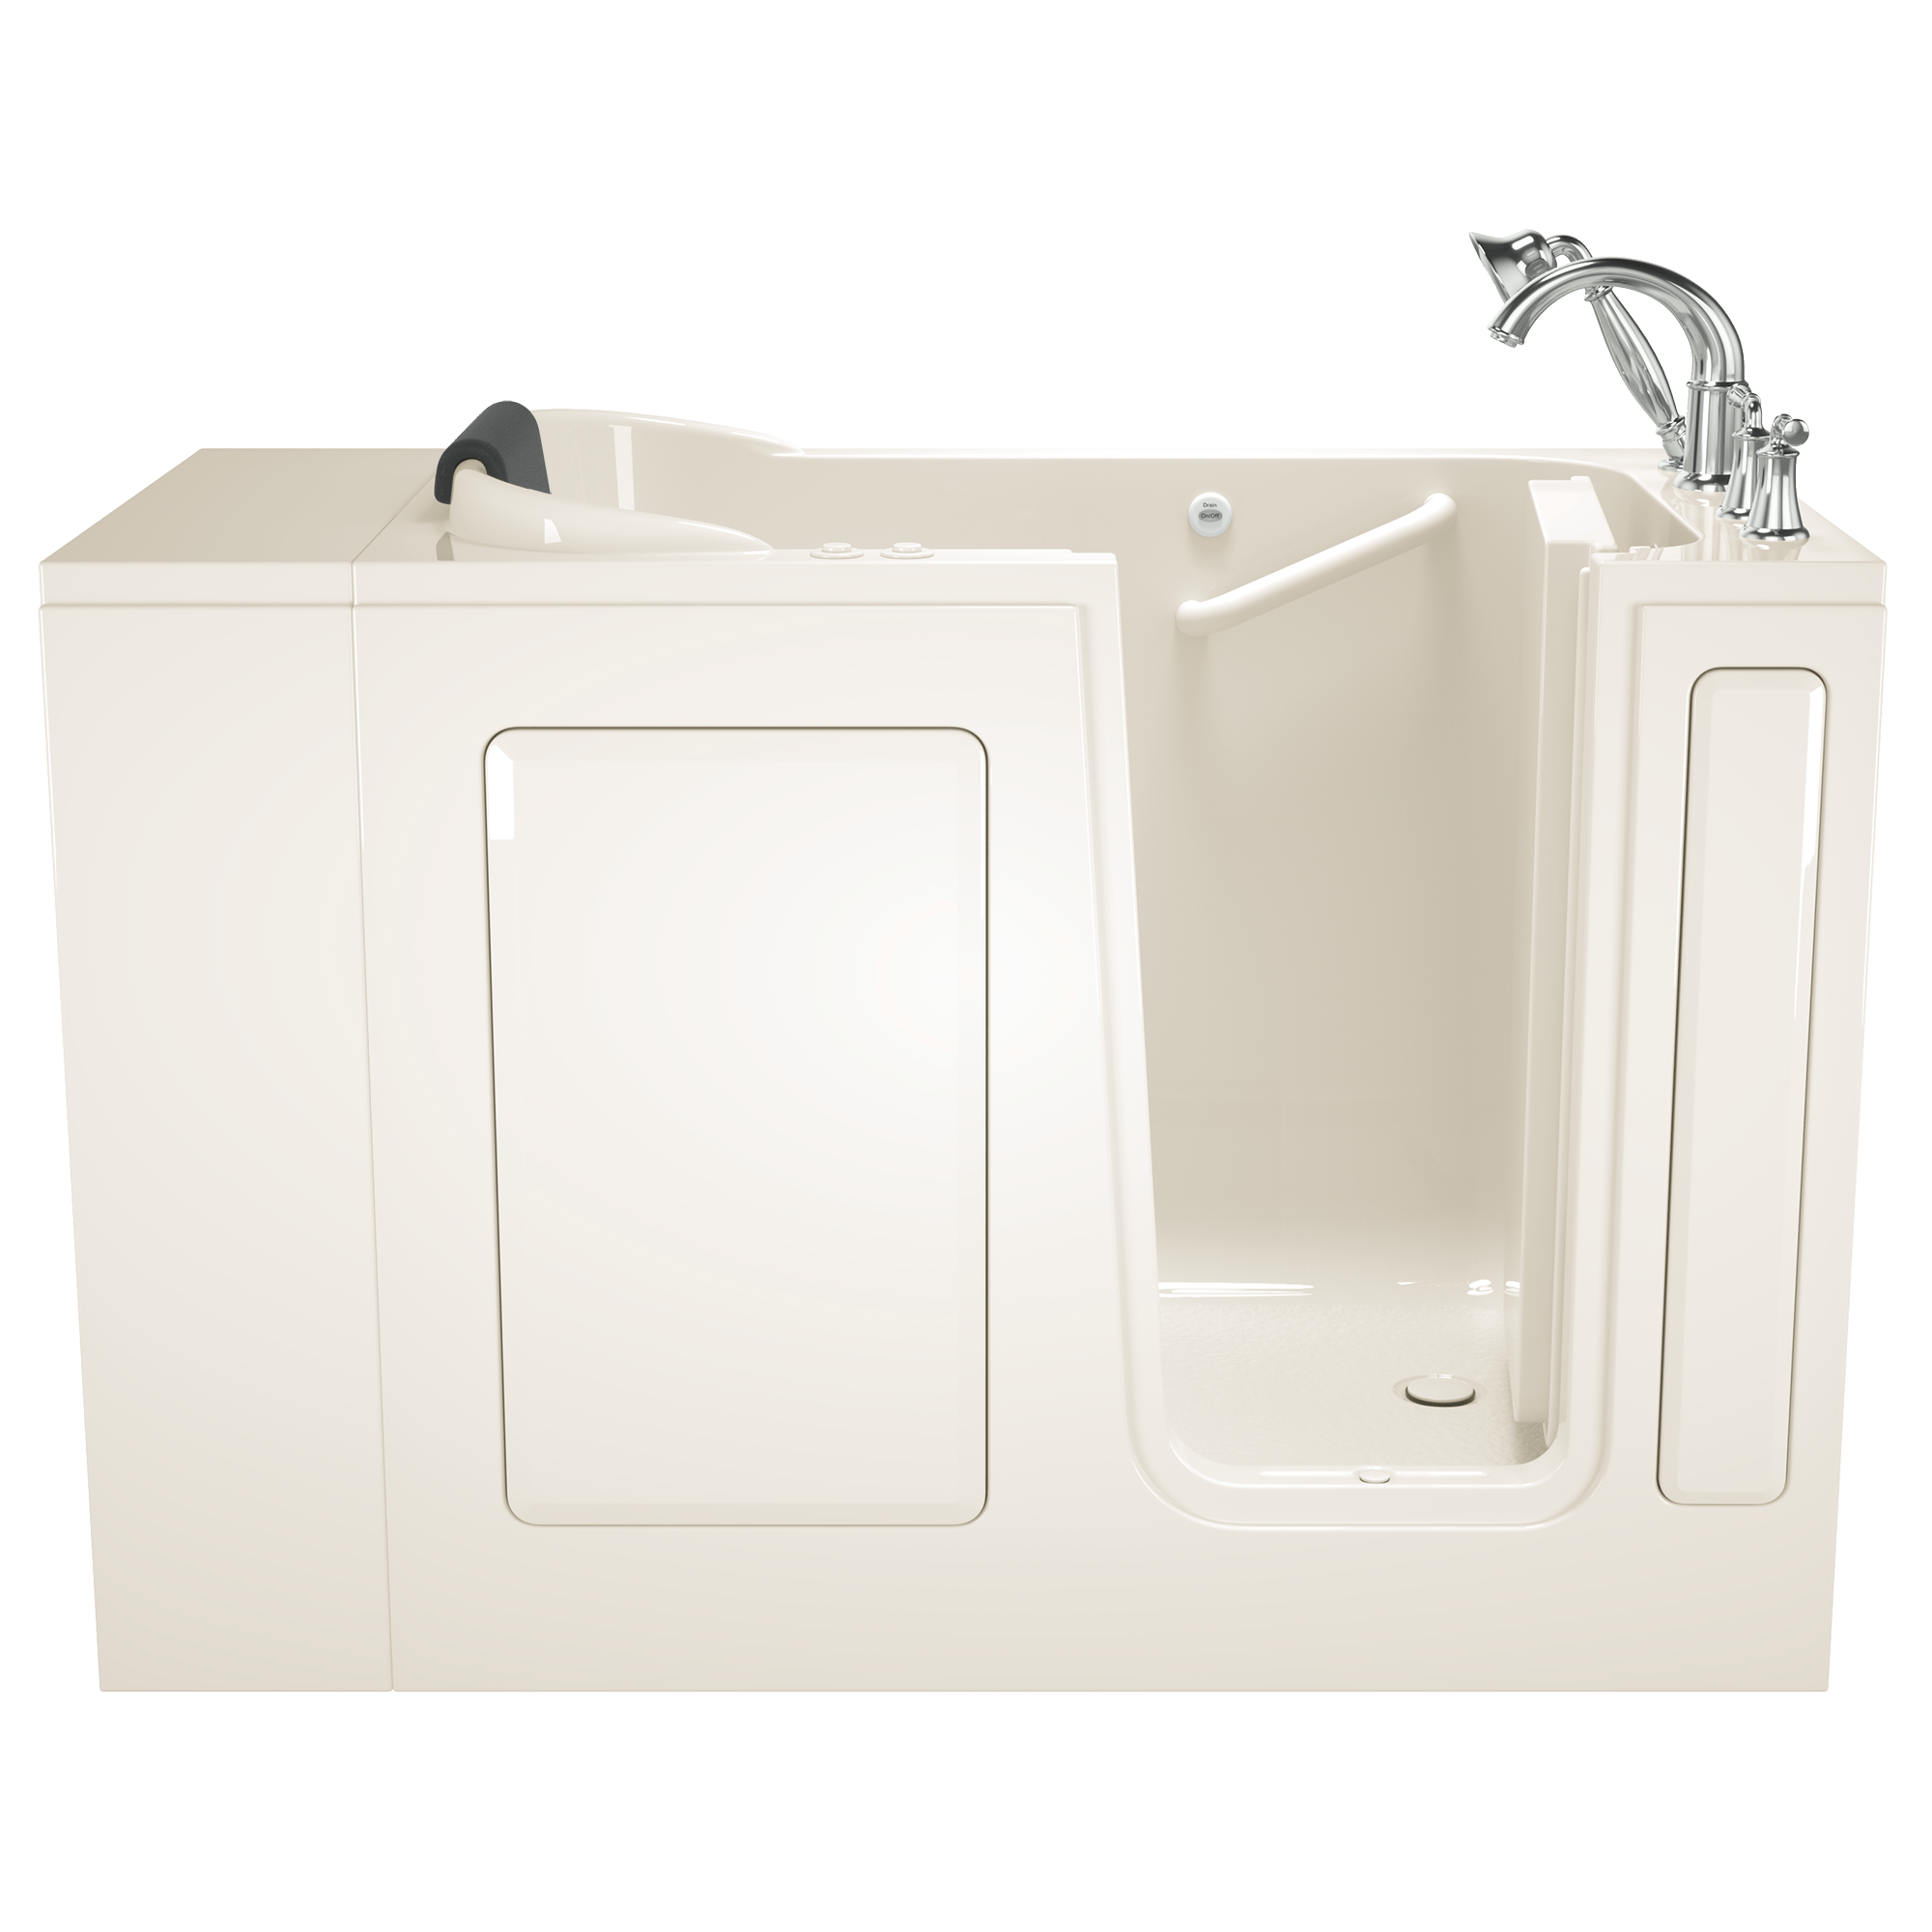 Gelcoat Premium Series 48x28 Inch Walk-In Bathtub with Dual Air Massage and Jet Massage System - Right Hand Door and Drain